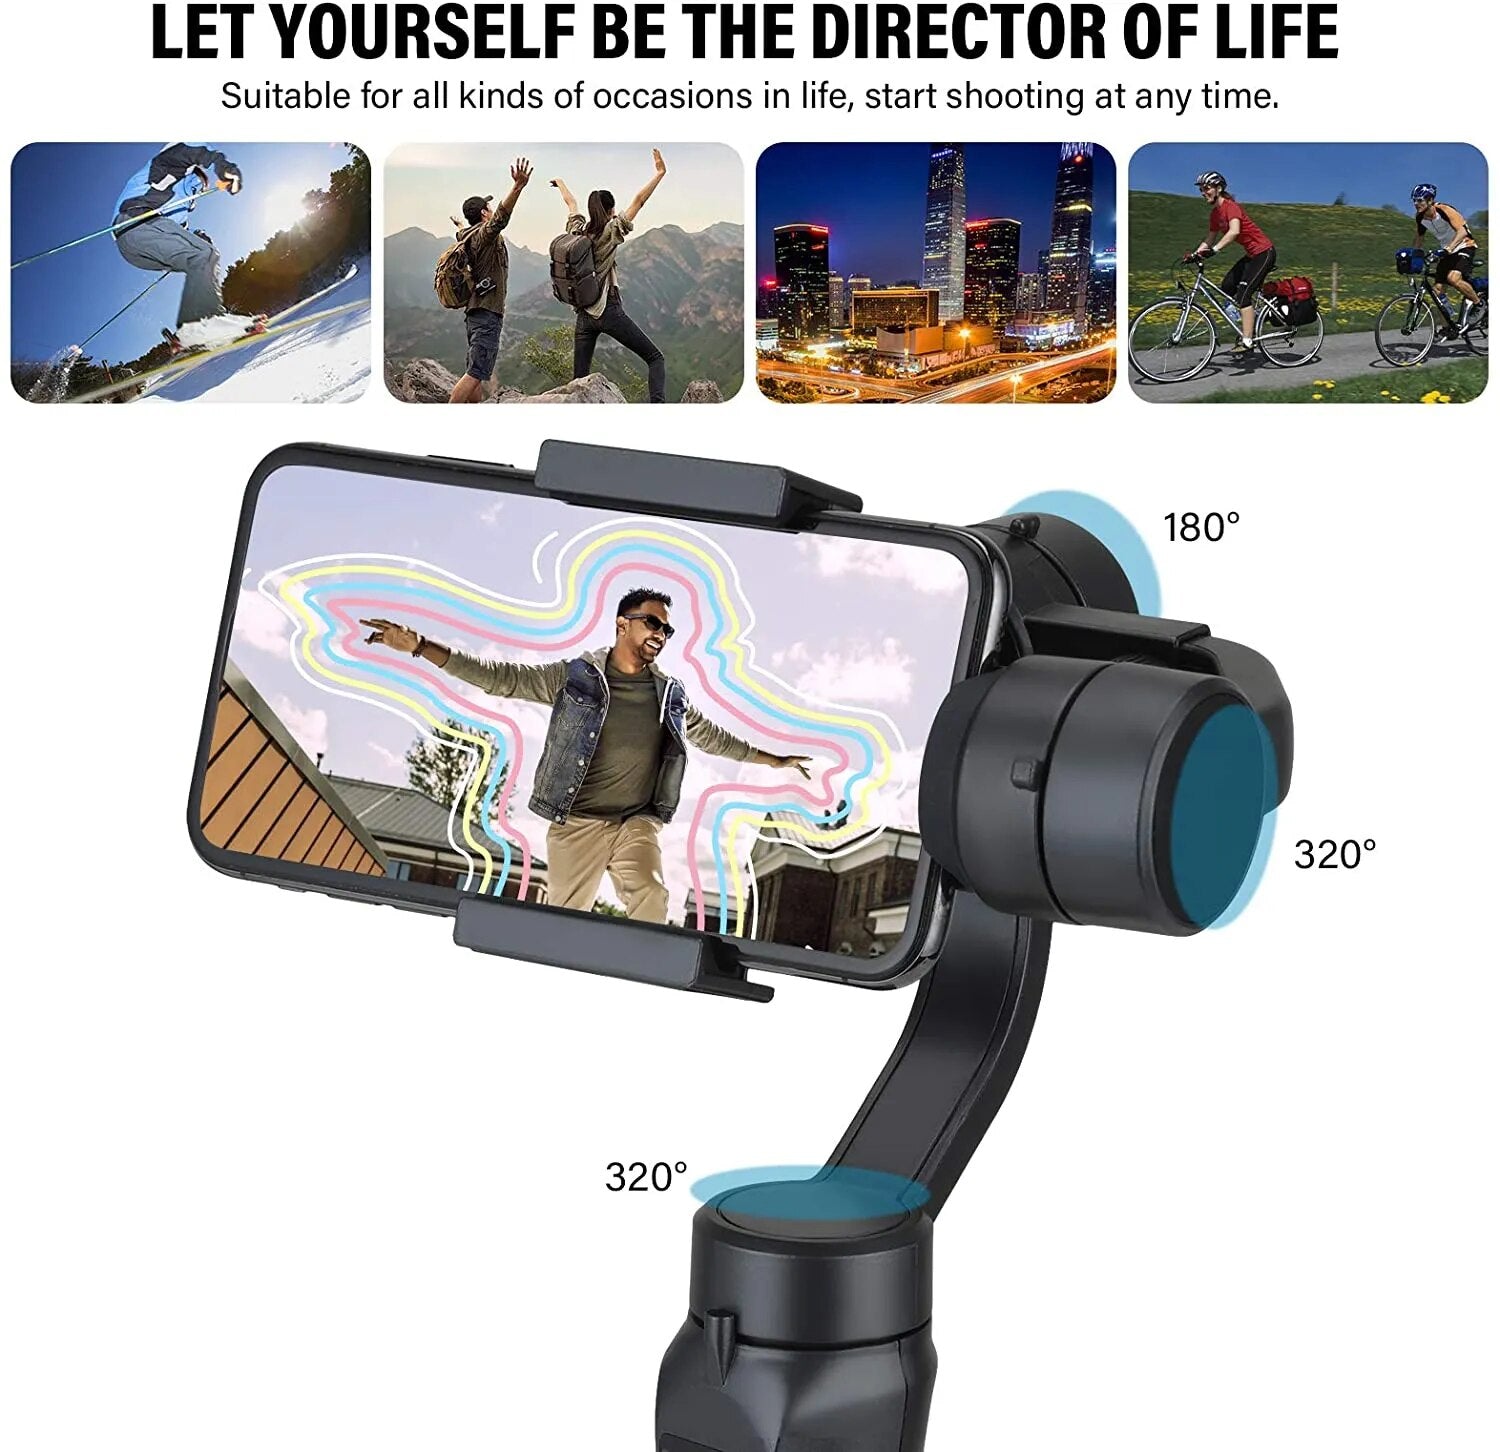 F6 3 Axis Gimbal Handheld Stabilizer Cellphone Action Camera Holder Anti Shake Video Record Smartphone Gimbal For Phone